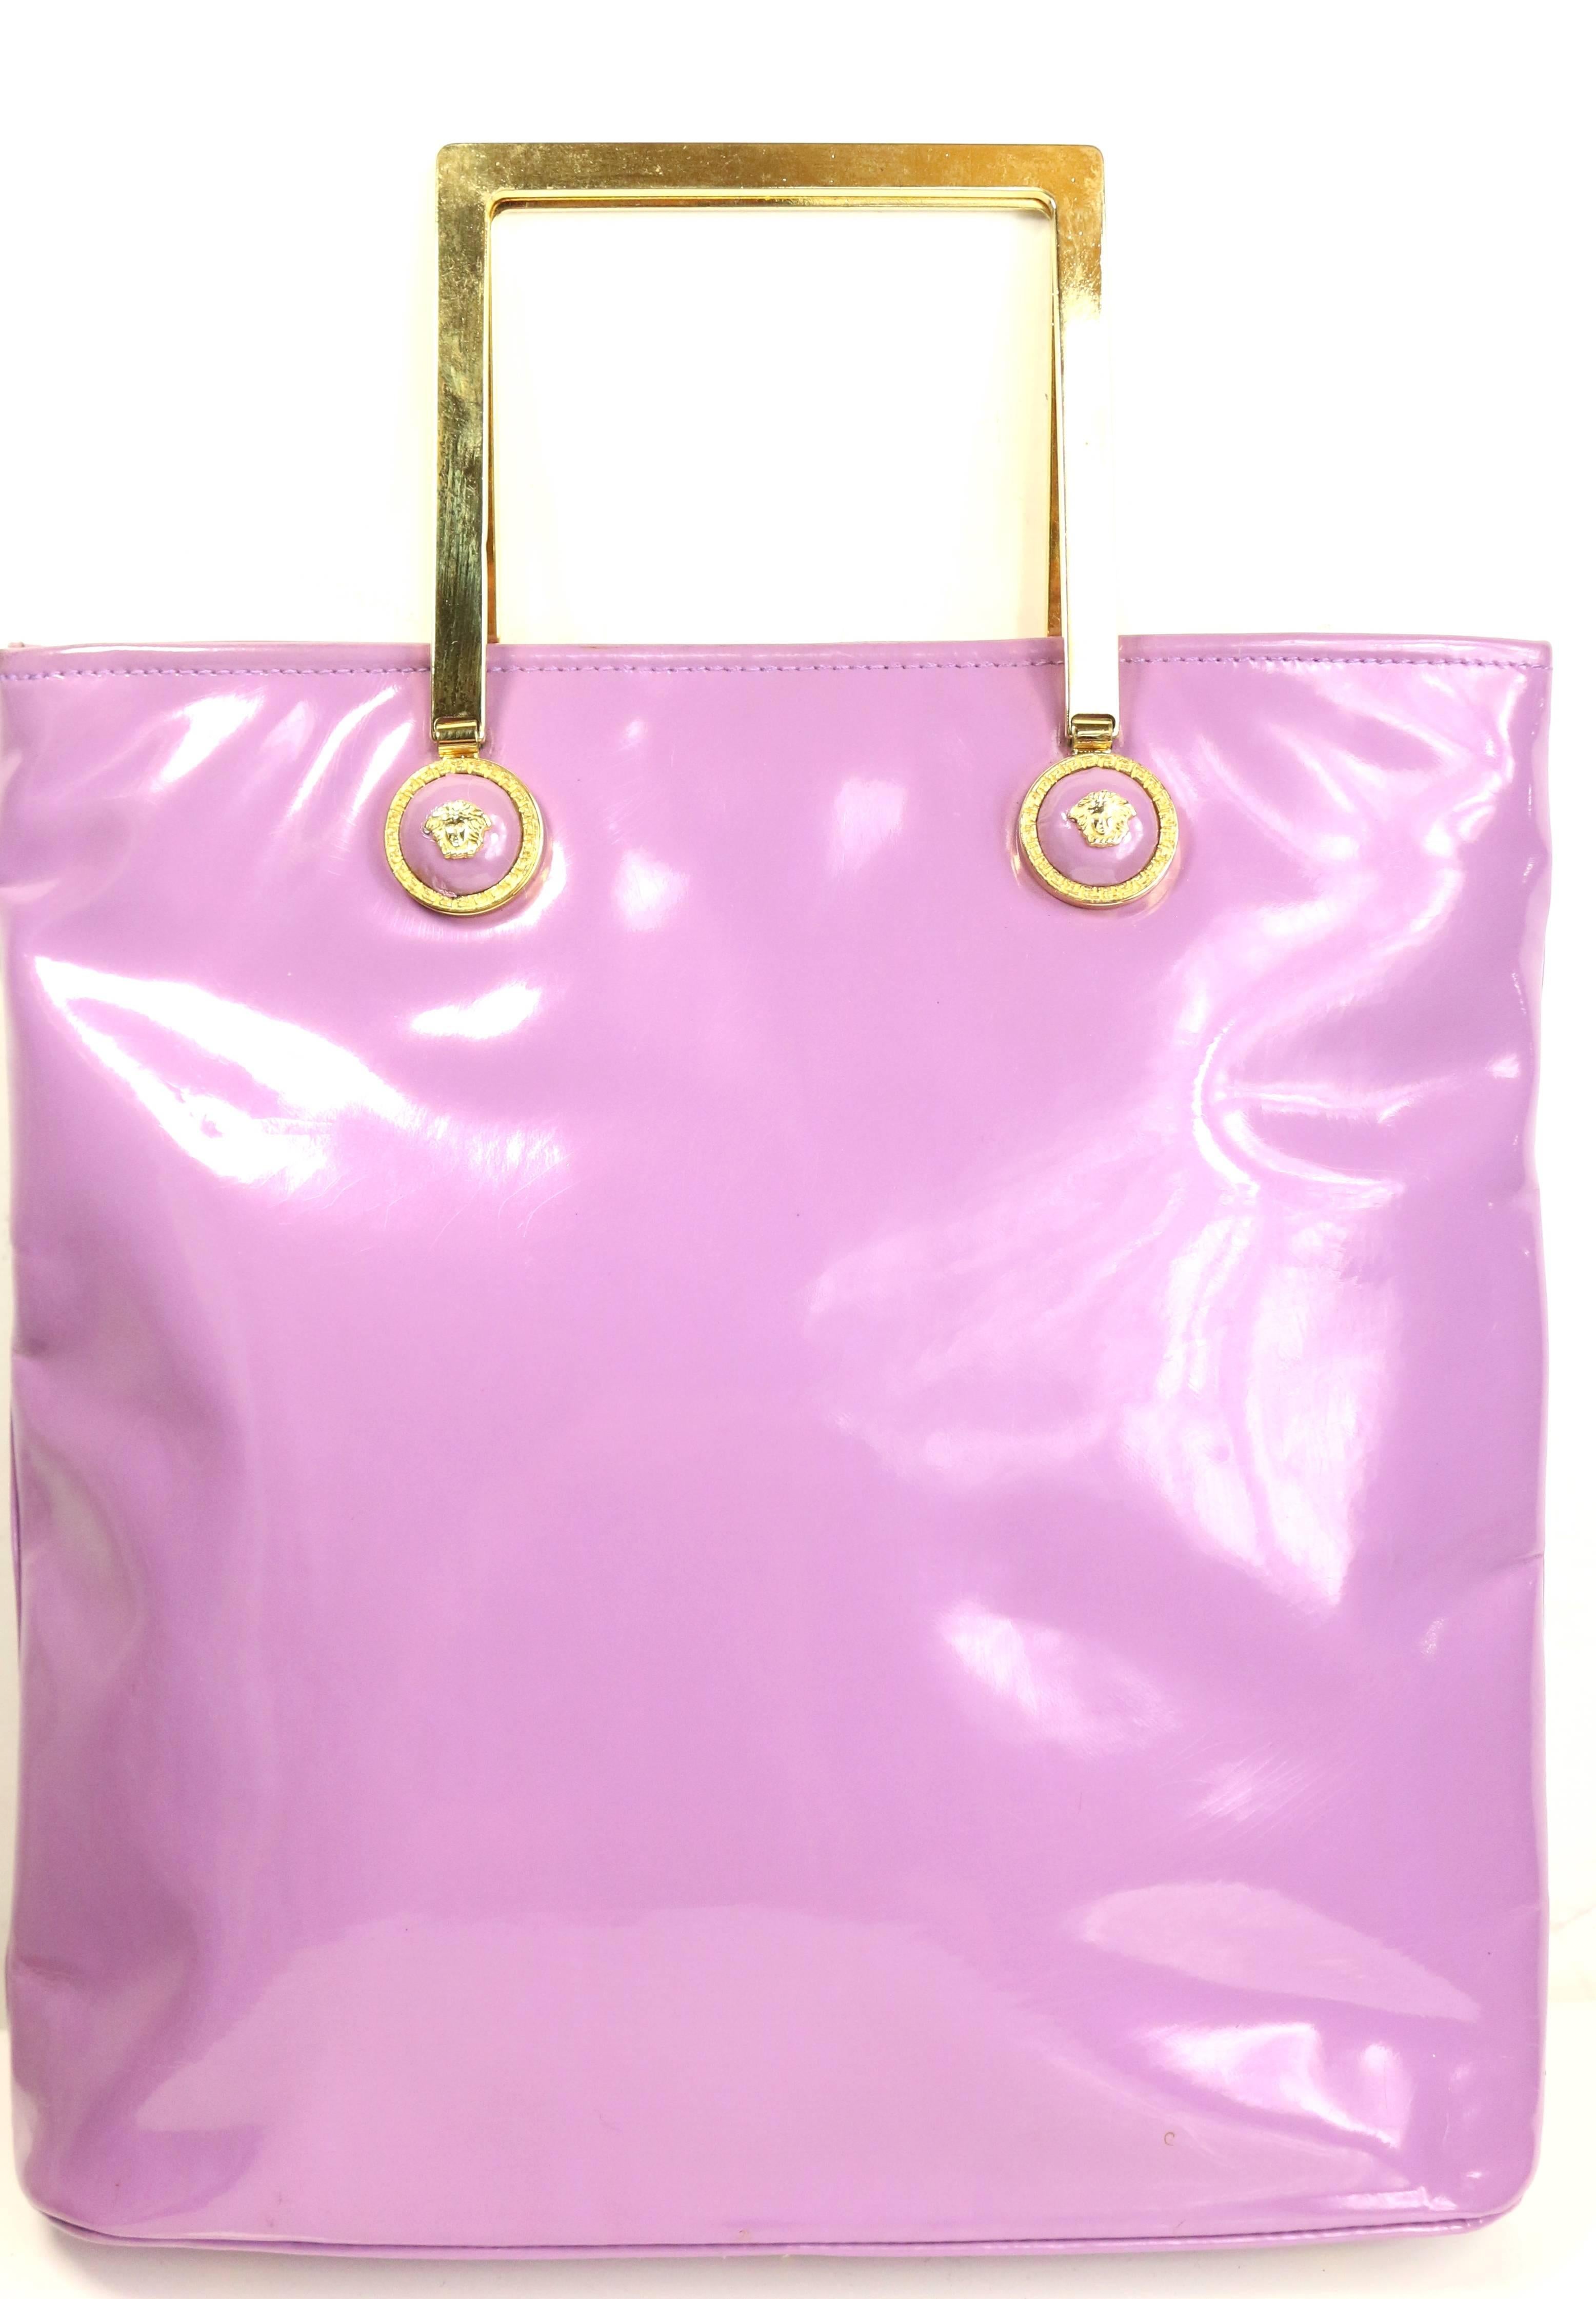 Gianni Versace Purple Patent Leather with Gold Toned Hardware Handle ...